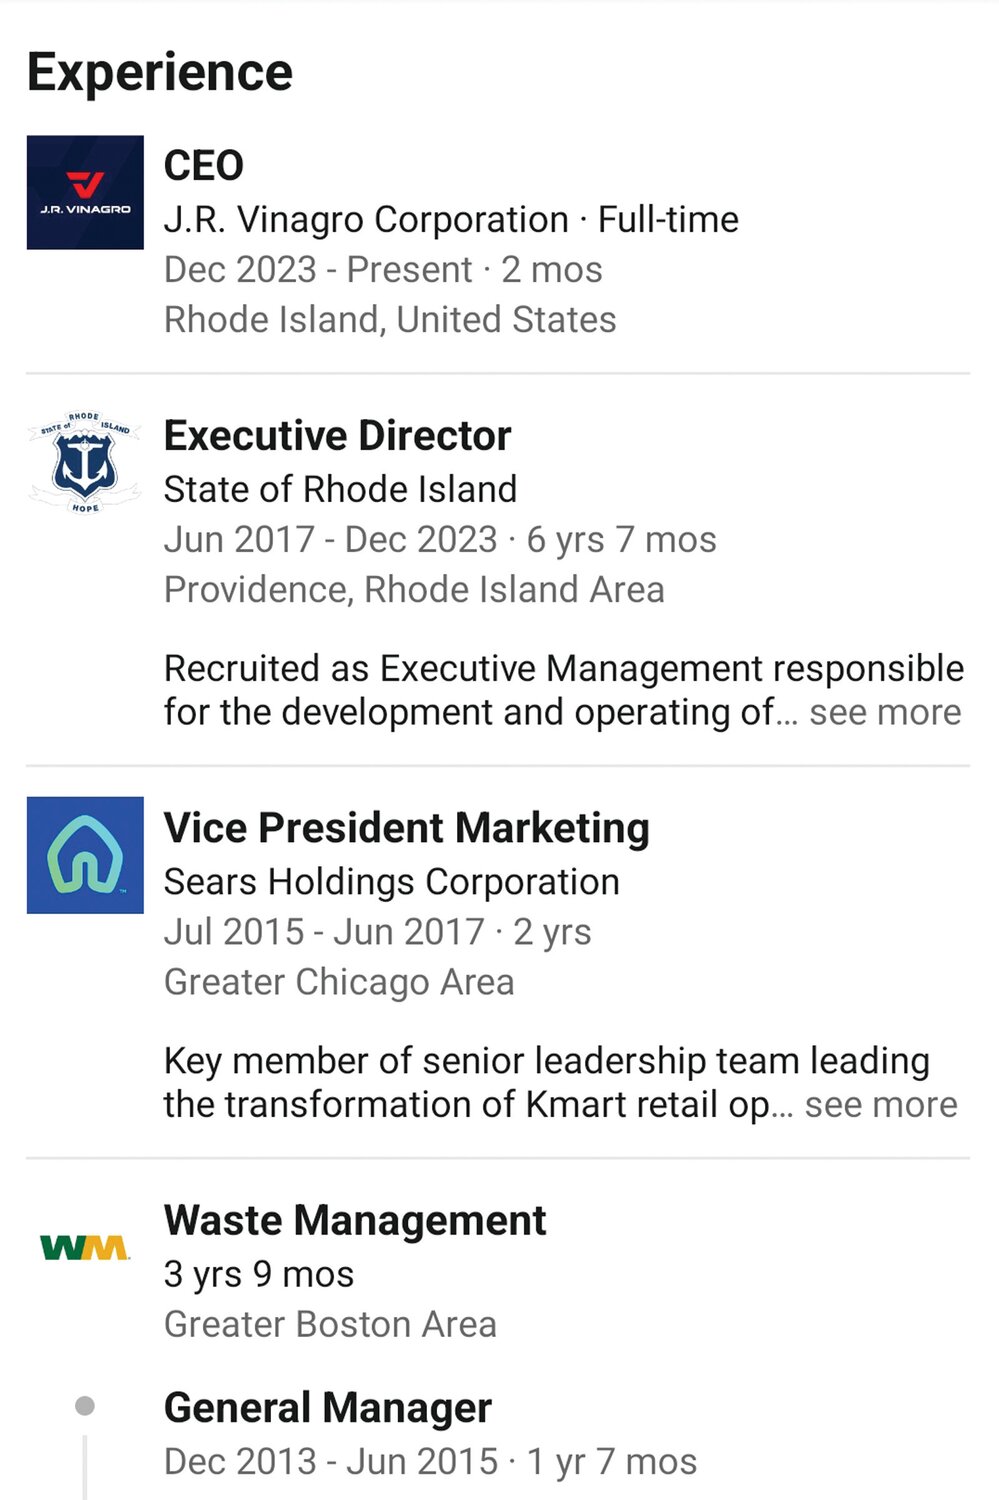 NEW BOSS: Former Rhode Island Resource Recovery Corporation (RIRRC) Executive Director Joseph Reposa announced on Linked In that he has been hired as J.R. Vinagro’s new CEO. He lists his previous experience.